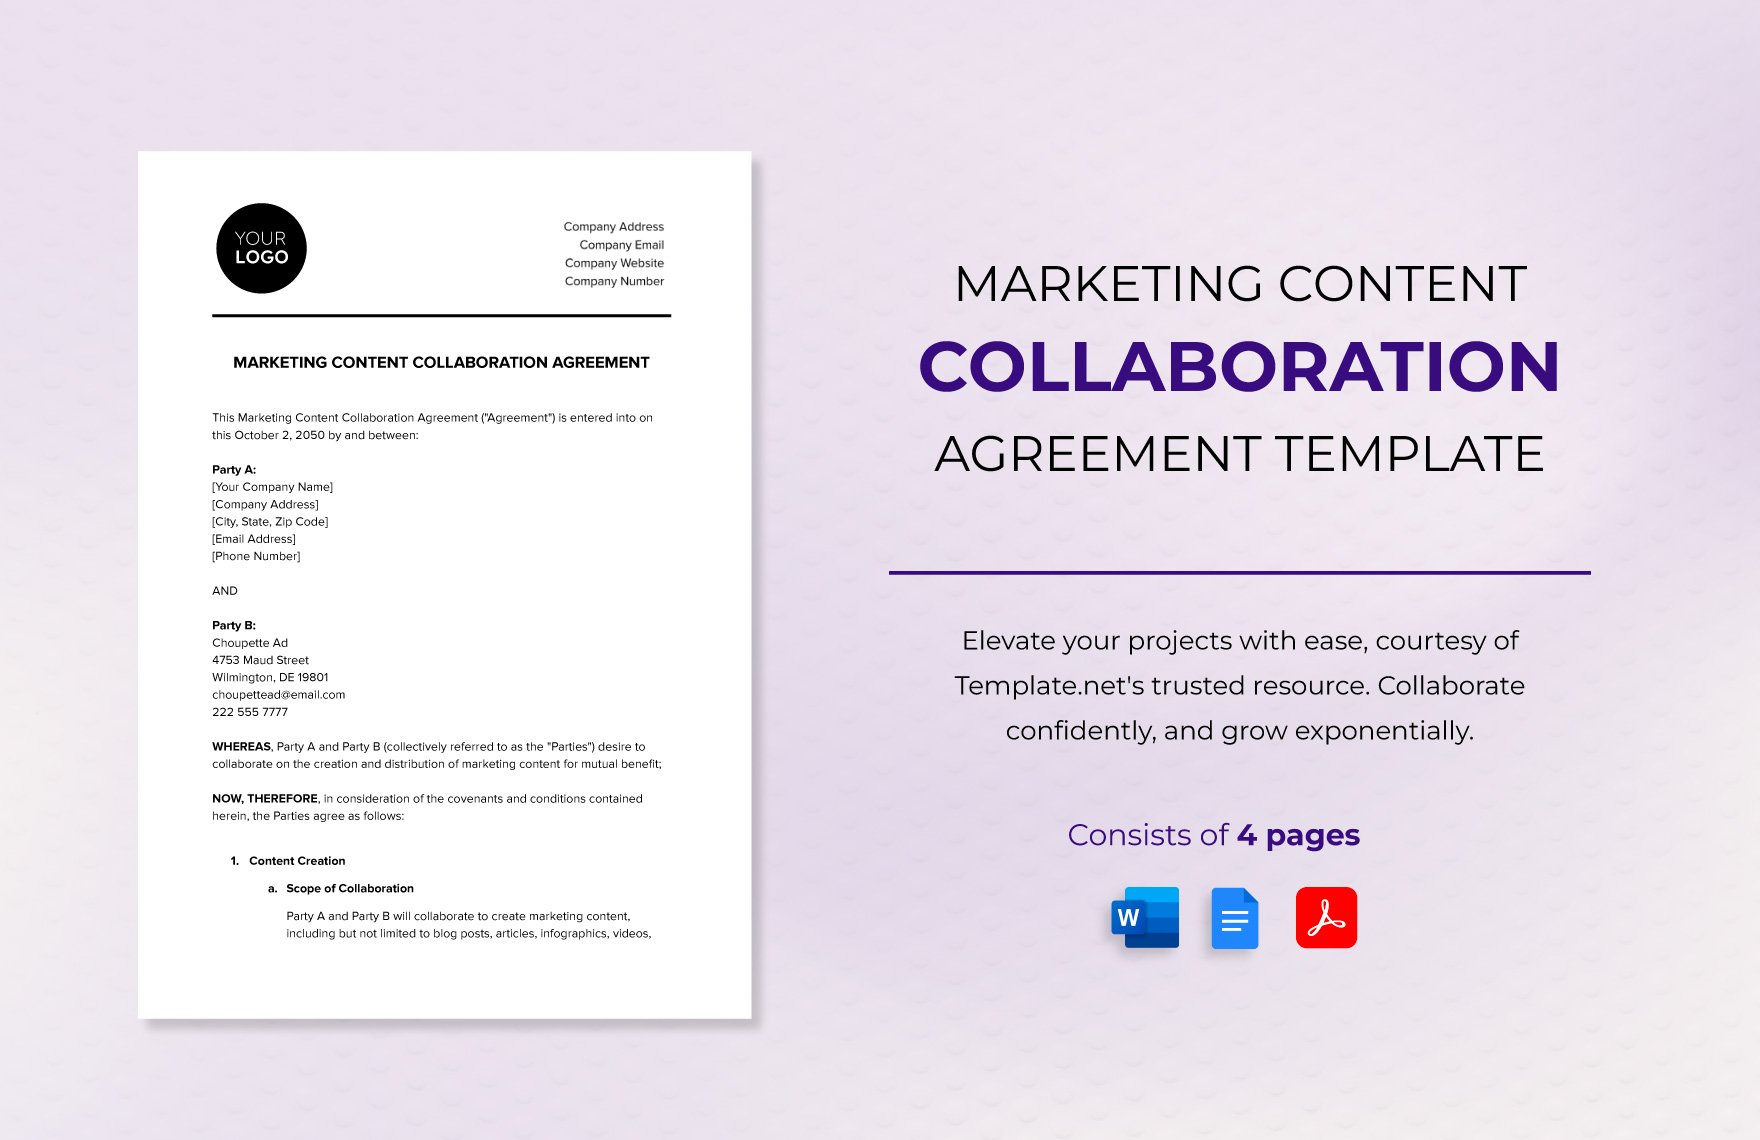 Marketing Content Collaboration Agreement Template in Word, Google Docs, PDF